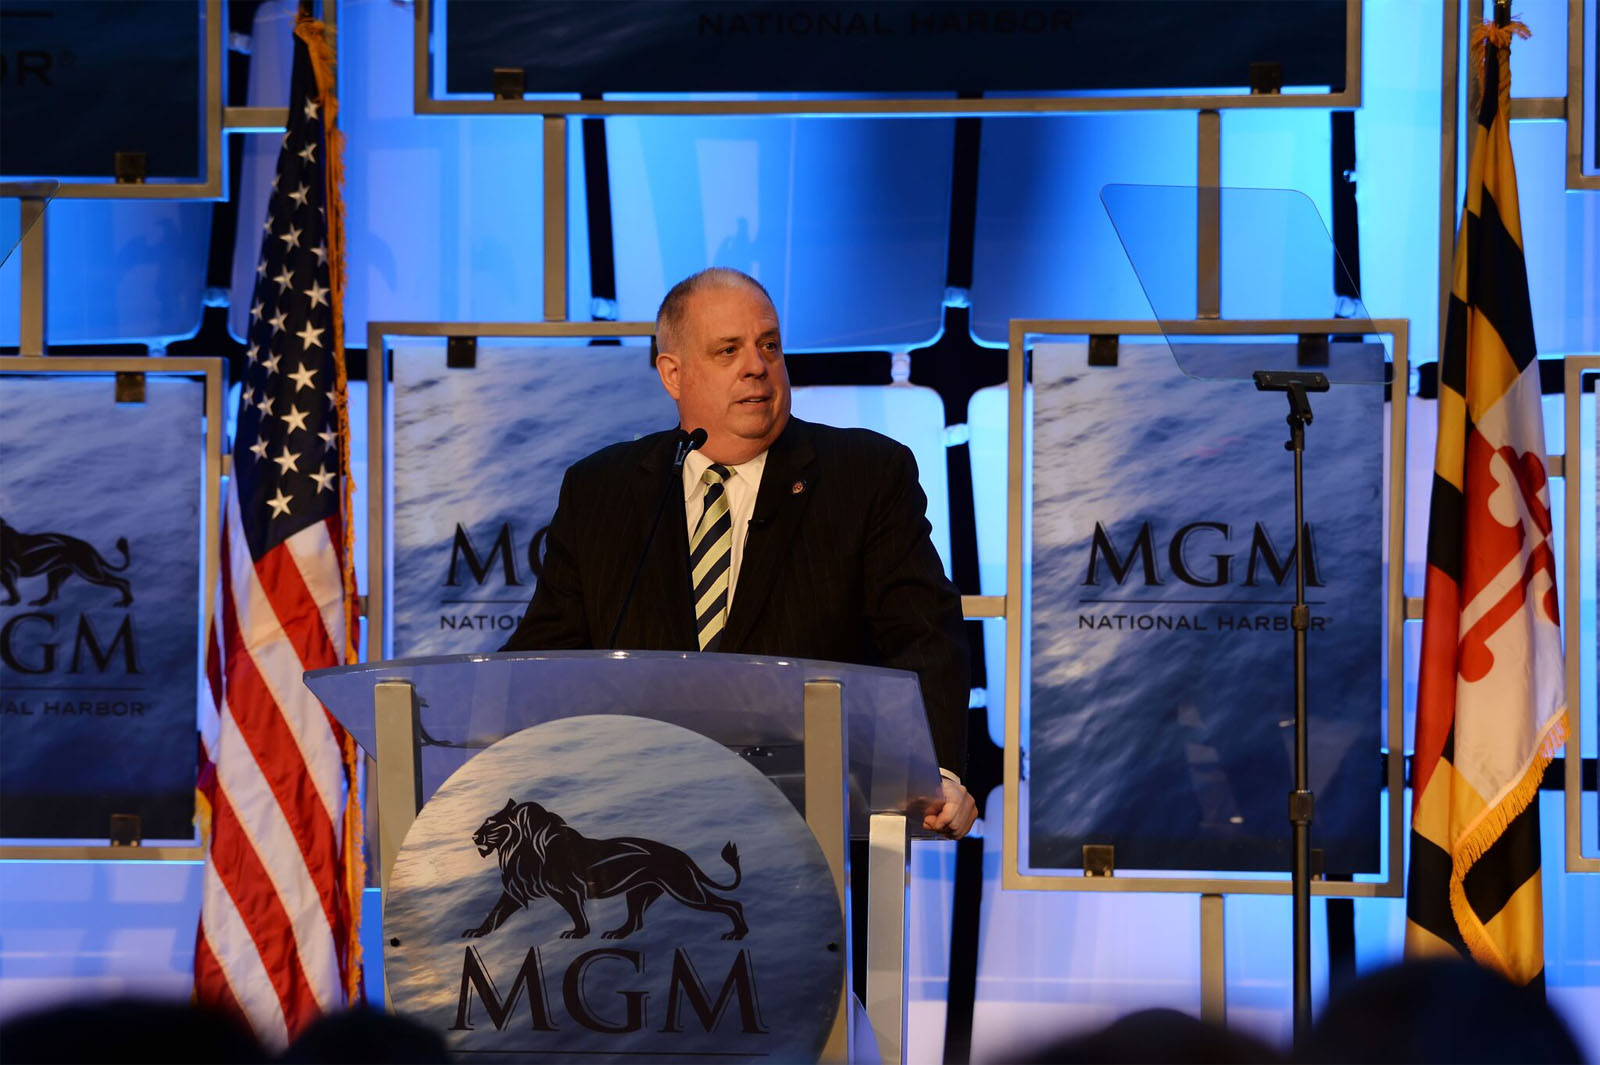 Maryland Gov. Larry Hogan speaks at the grand opening ceremony for the MGM National Harbor Dec. 8. 
(Courtesy Shannon Finney, www.shannonfinneyphotography.com